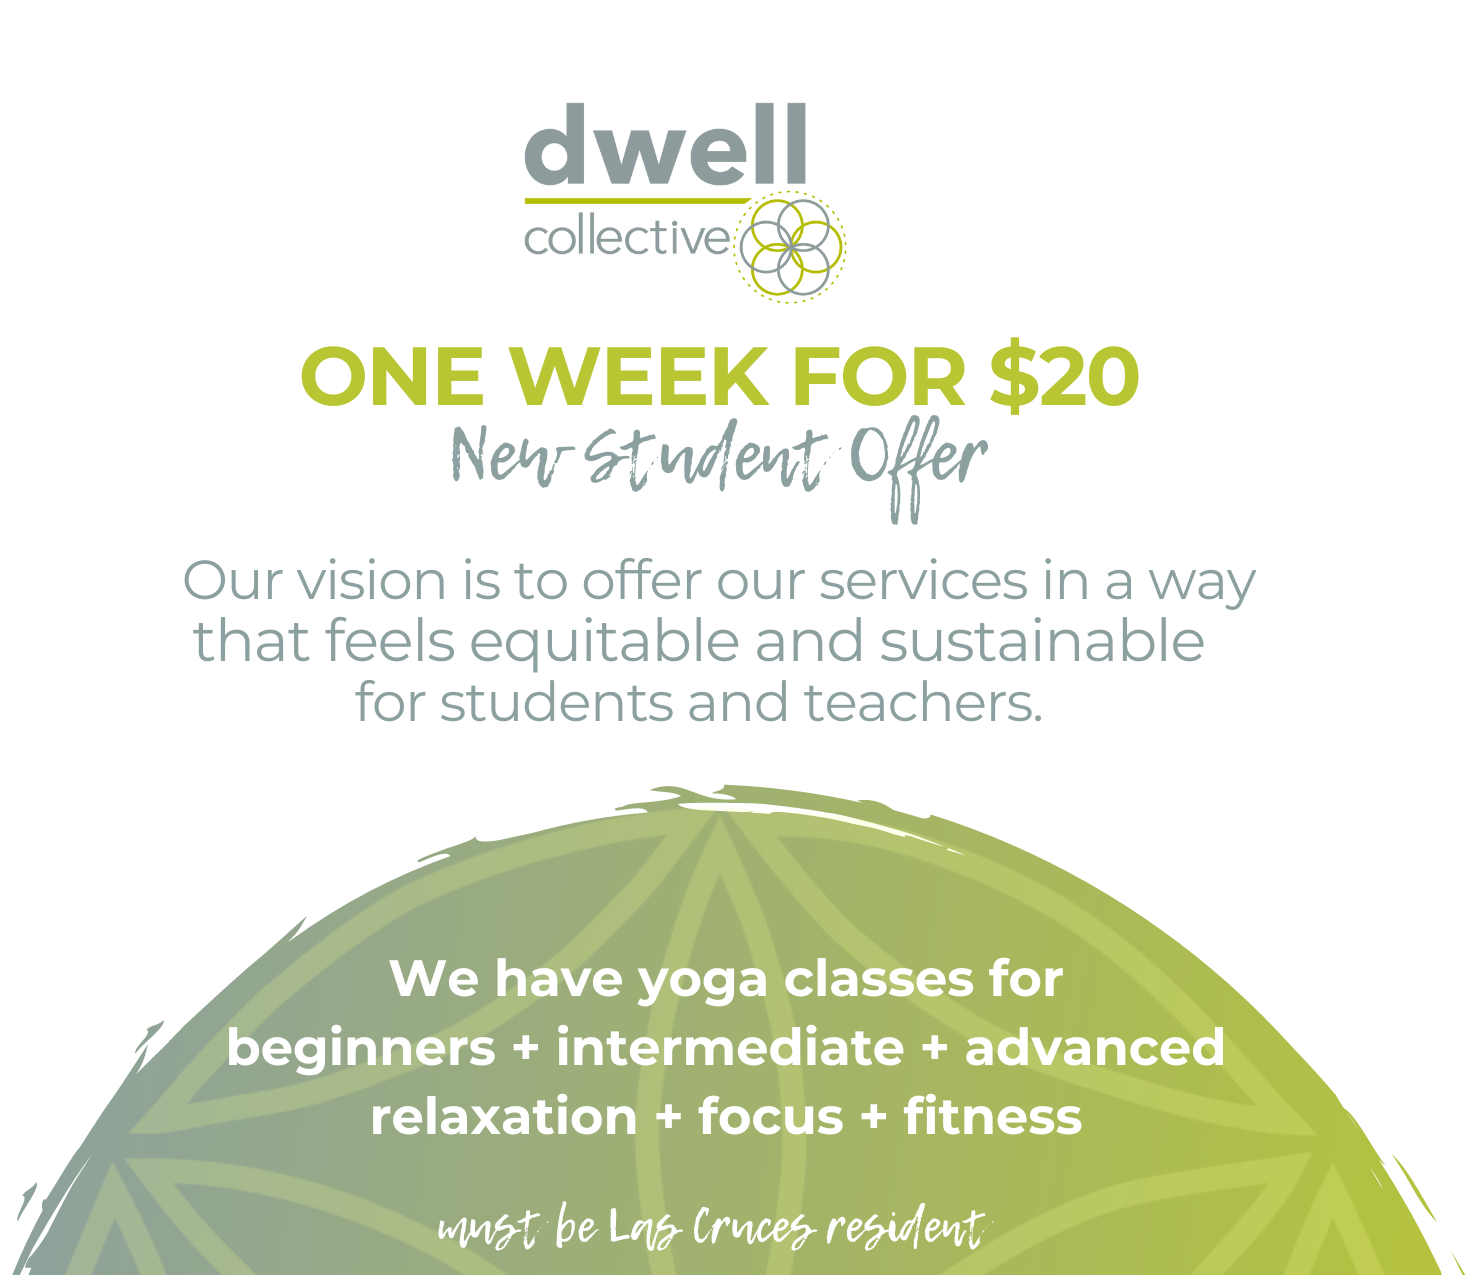 An advertisement for dwell collective offers a one week for $20 new student offer